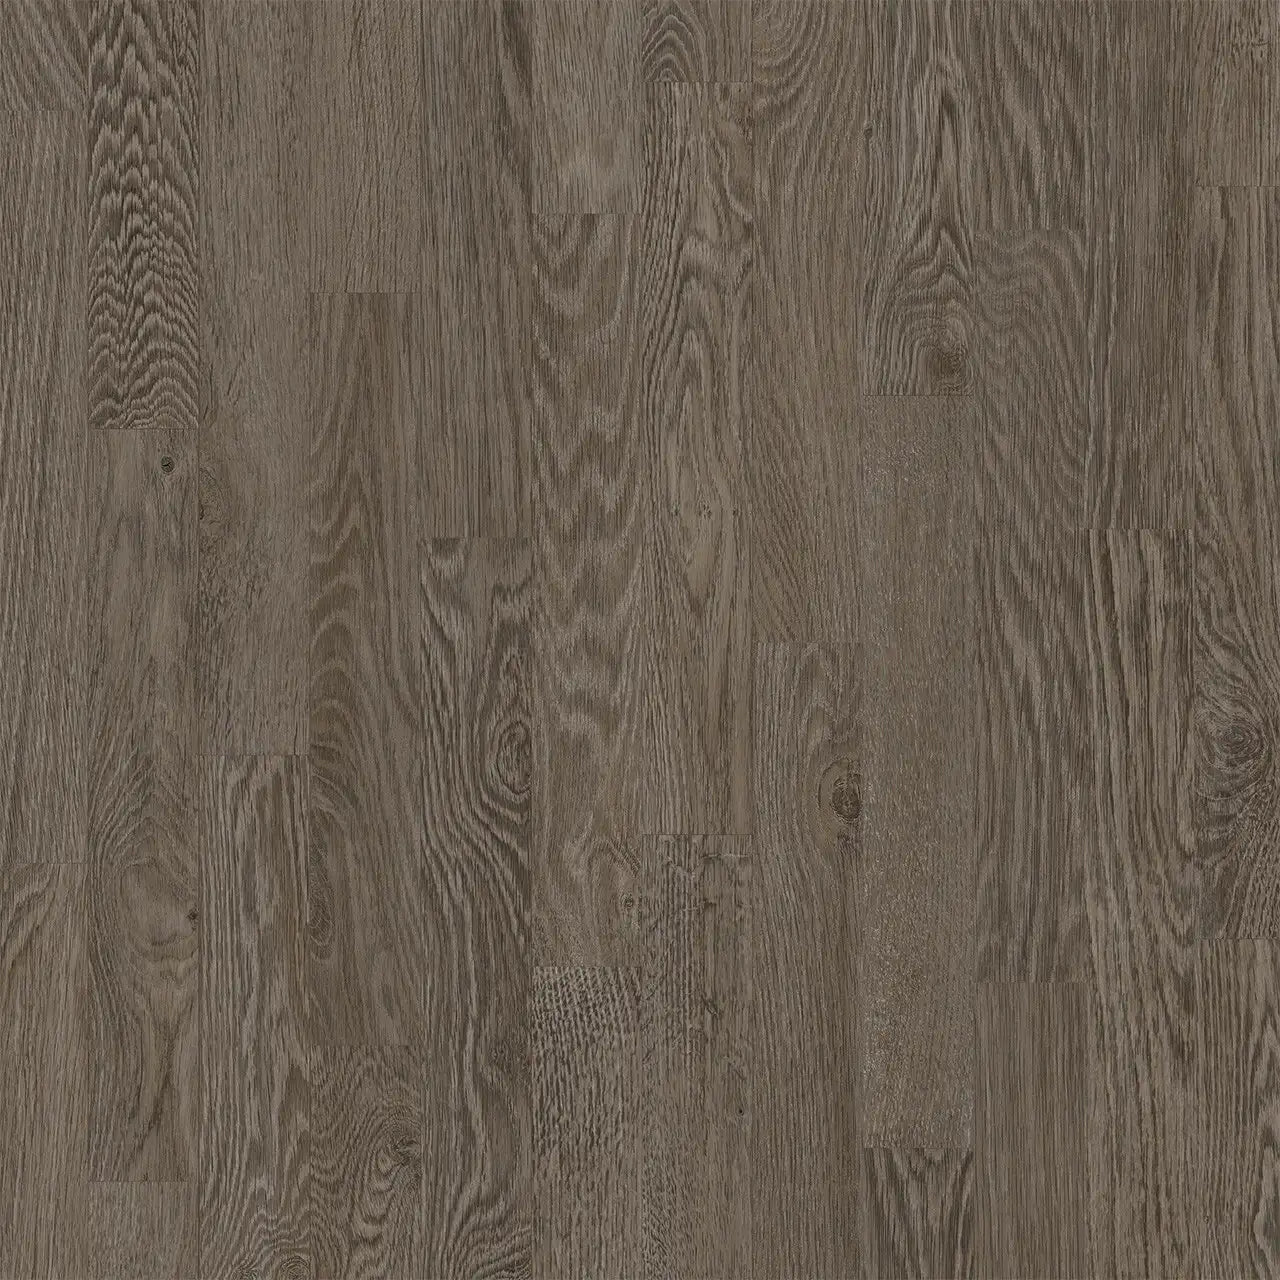 Engineered Floors - Atmosphere Collection - 7 in. x 48 in. - Calypso